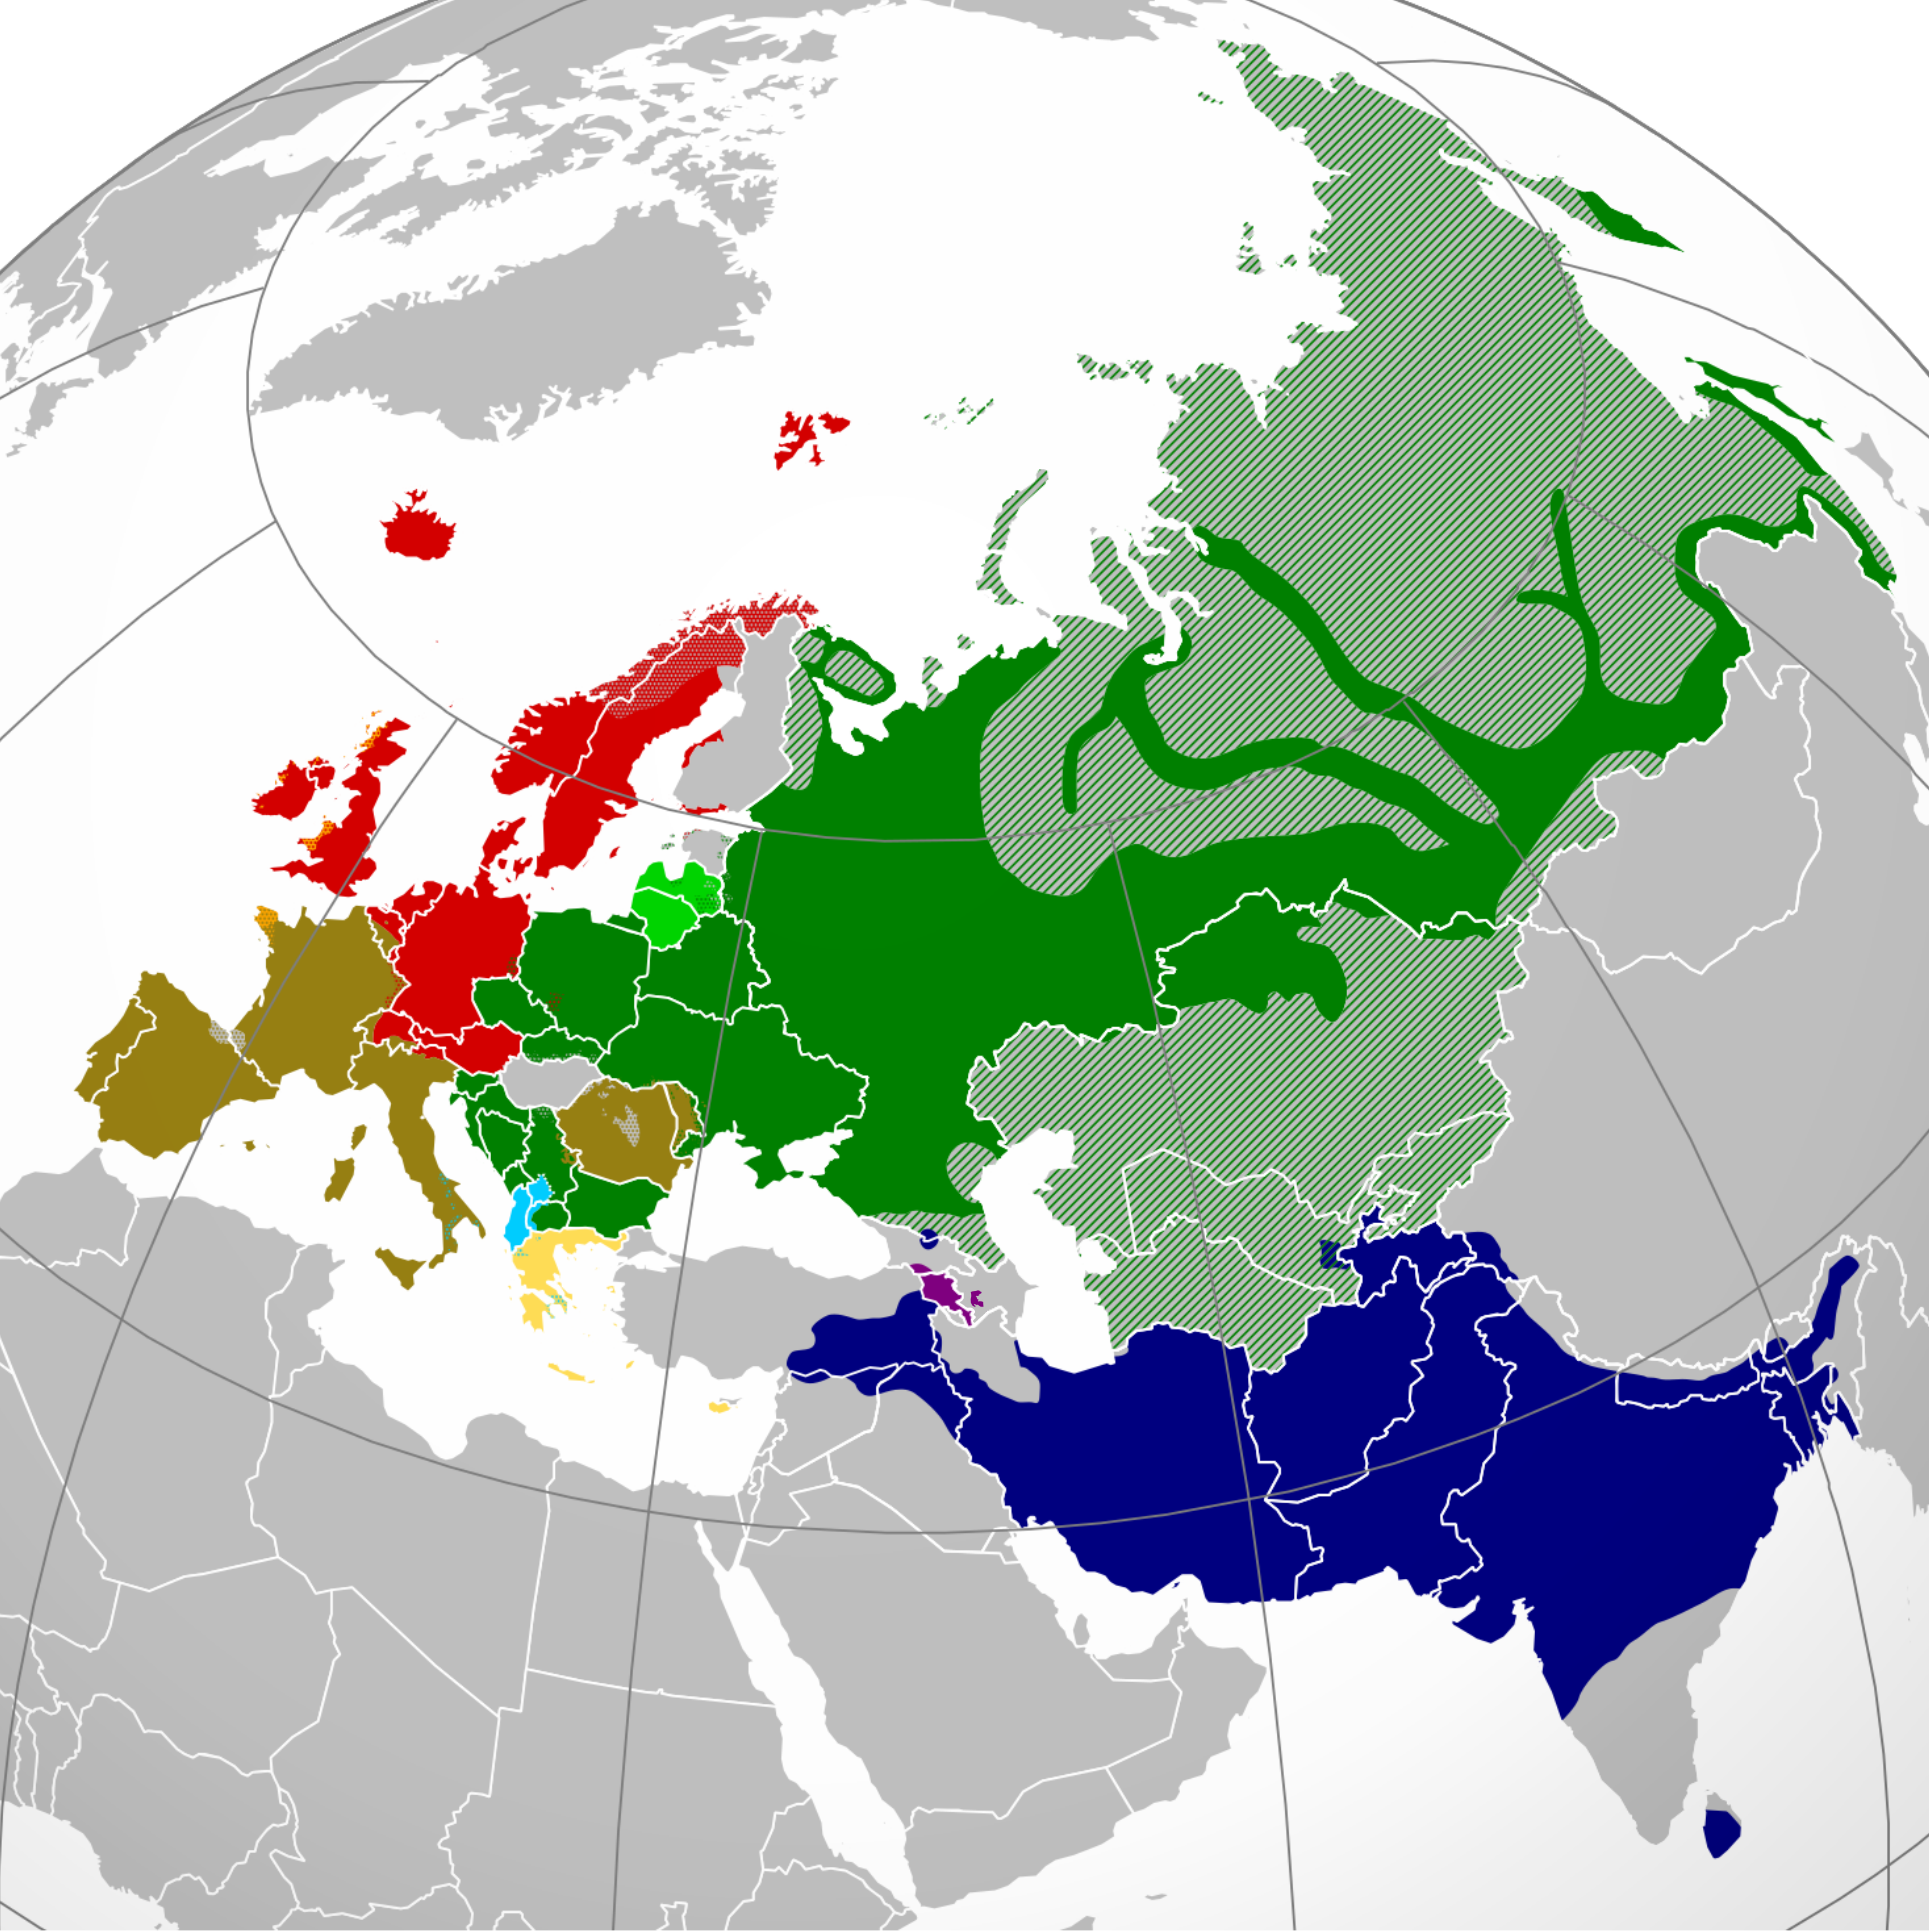 A map of eurasia, using colours to group together nations of smaller language families within the larger language family of PIE.